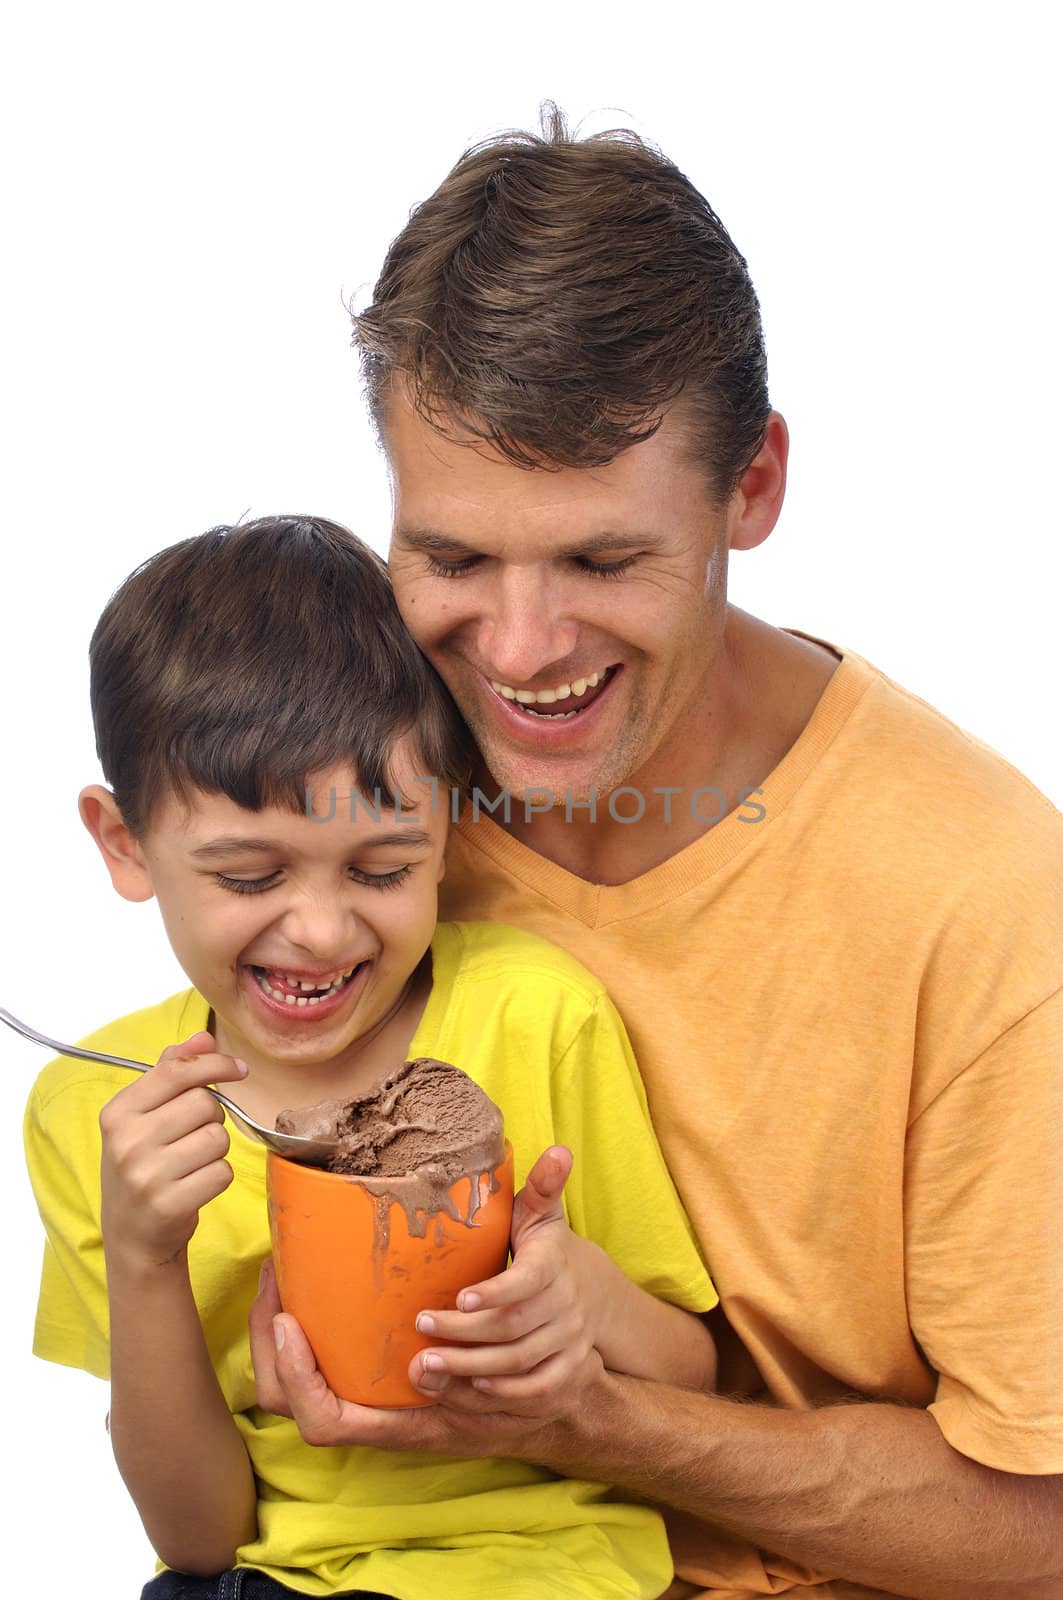 Father and son having fun and enjoy eating chocolate ice cream together on white background